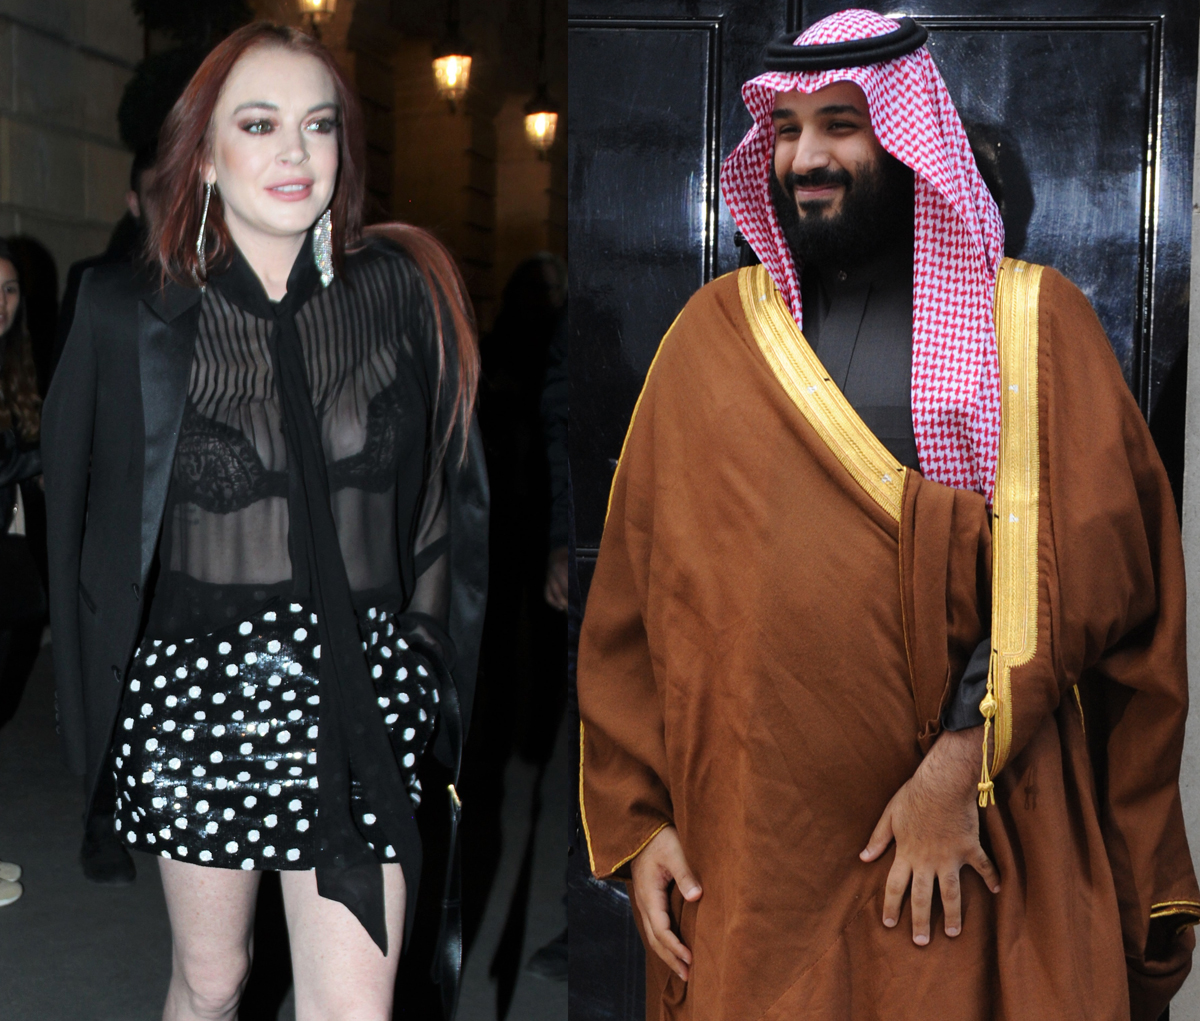 Exclusive So What S Going On Between Lindsay Lohan And The Crown Prince Of Saudi Arabia She